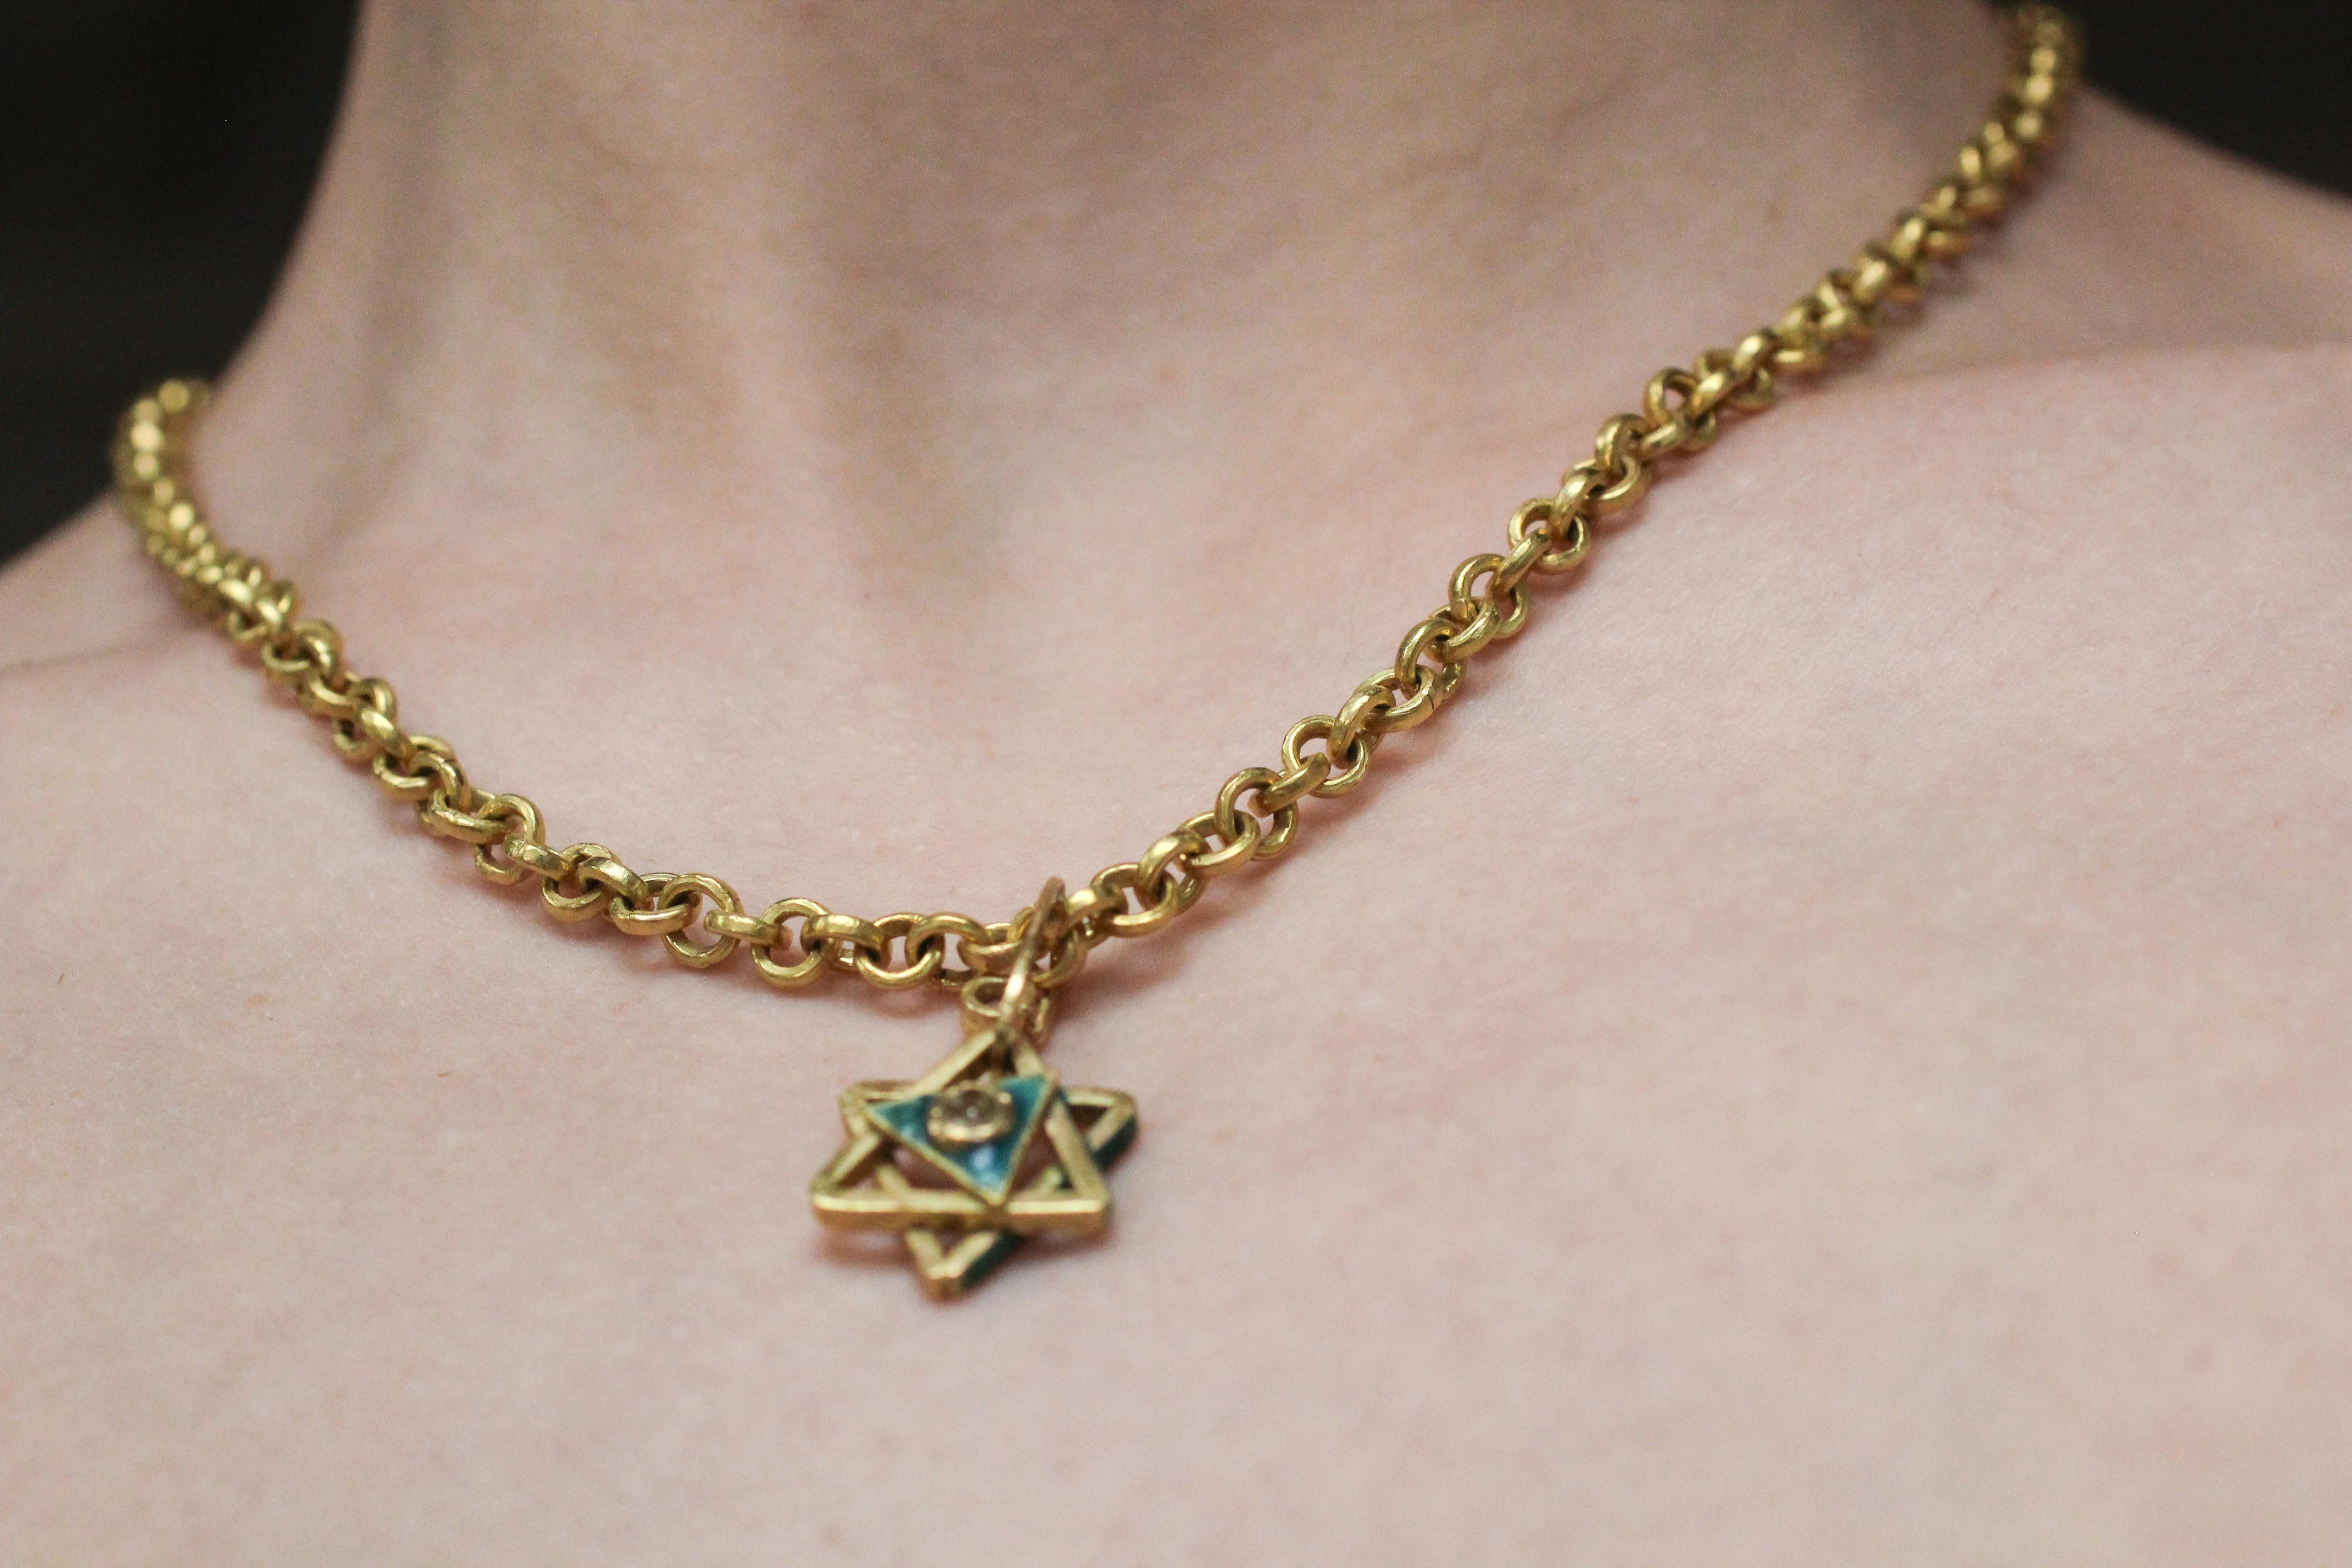 Enamel Magen David 18K Gold Chain Necklace Diamond Enhancer and Toggle Clasp For Sale 13